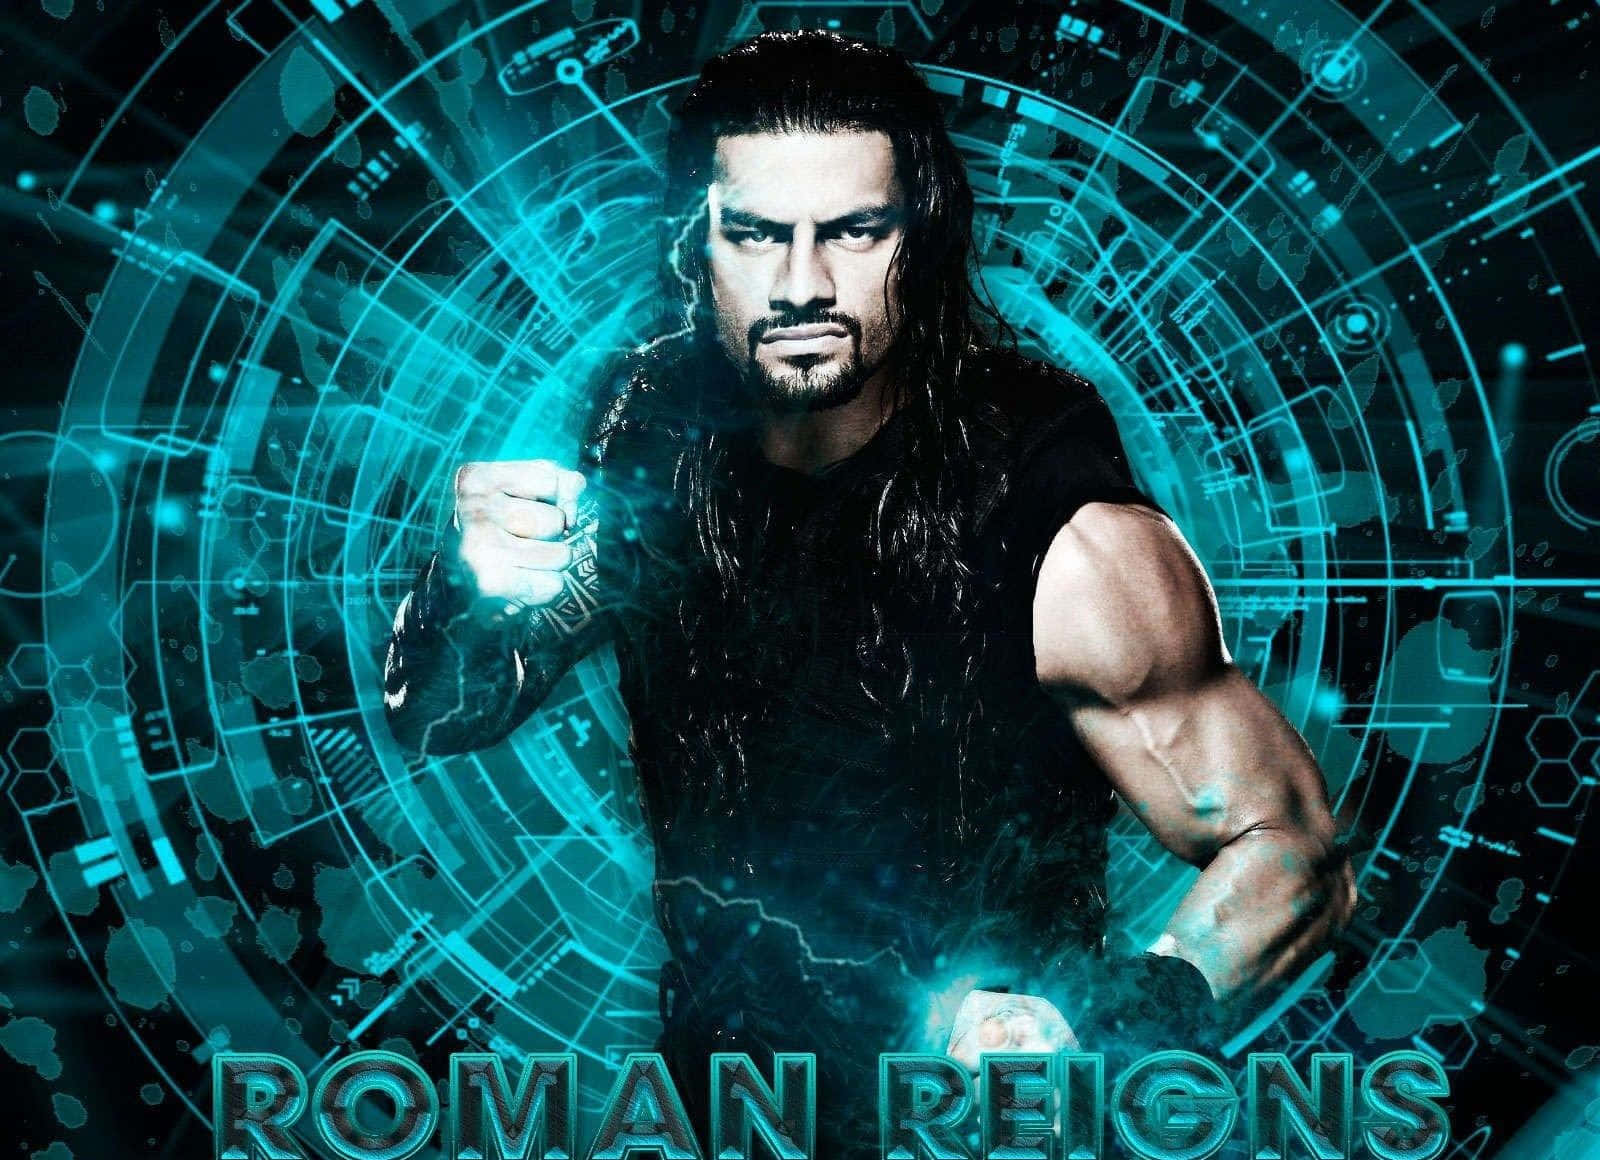 Roman Reigns at a WWE Live Event